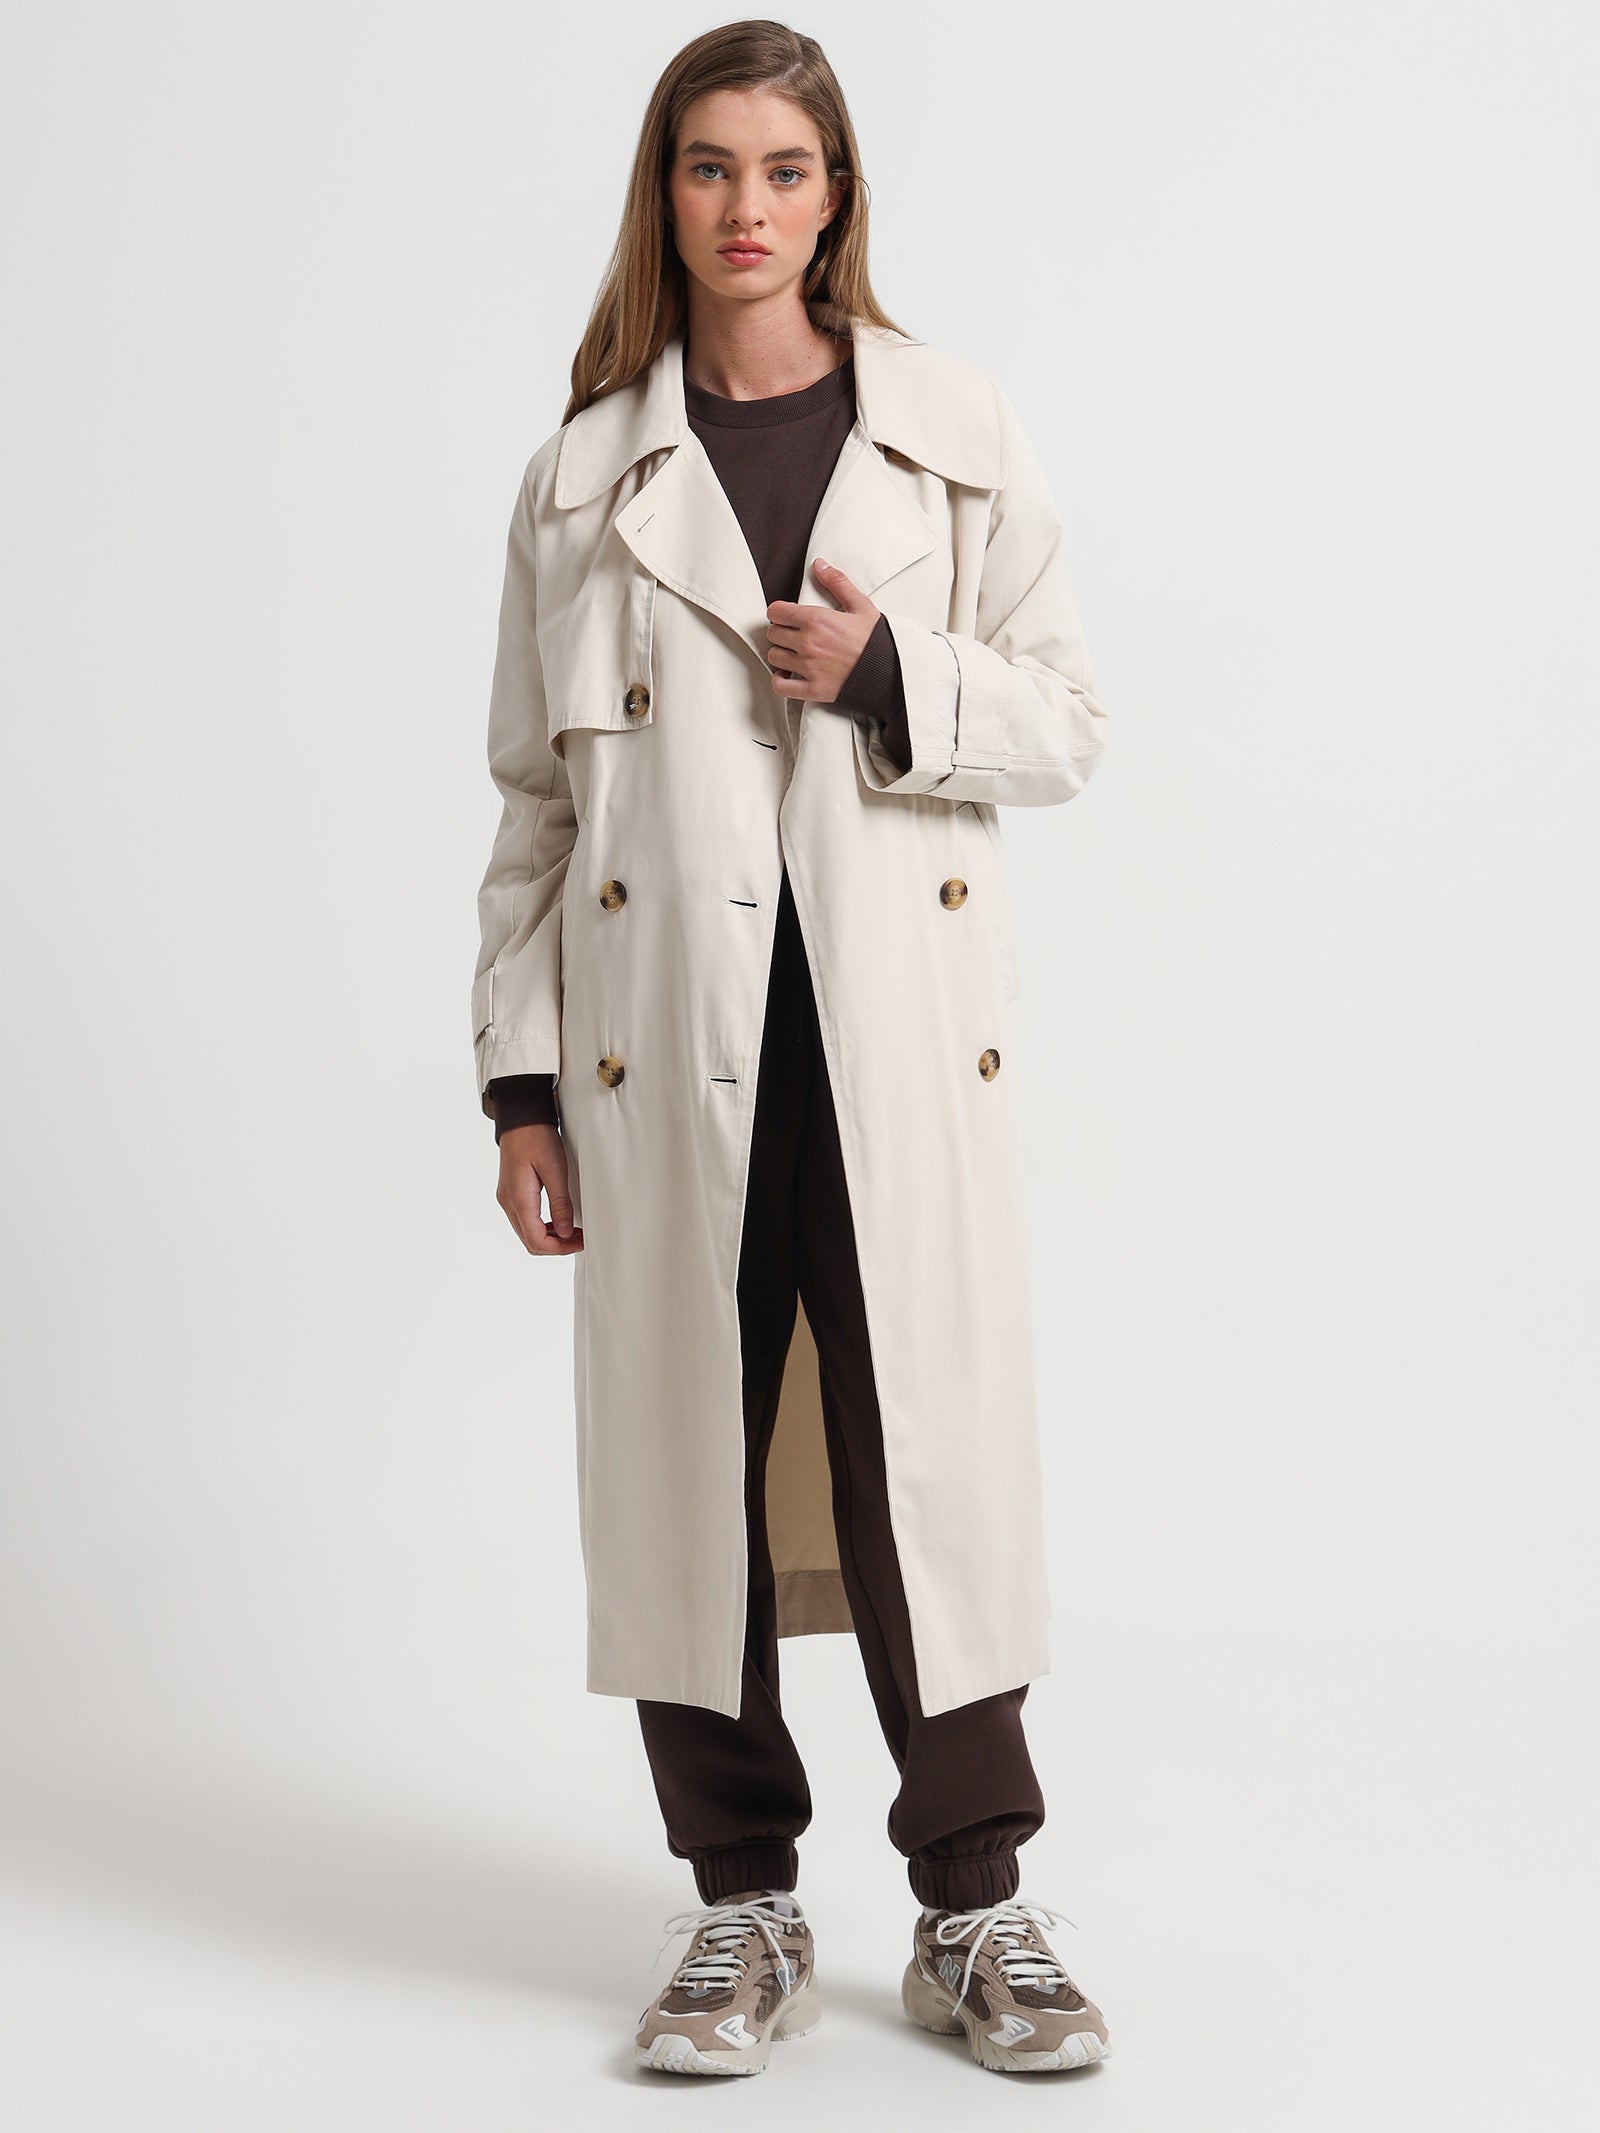 Odyssey Trench Coat in Cloud White